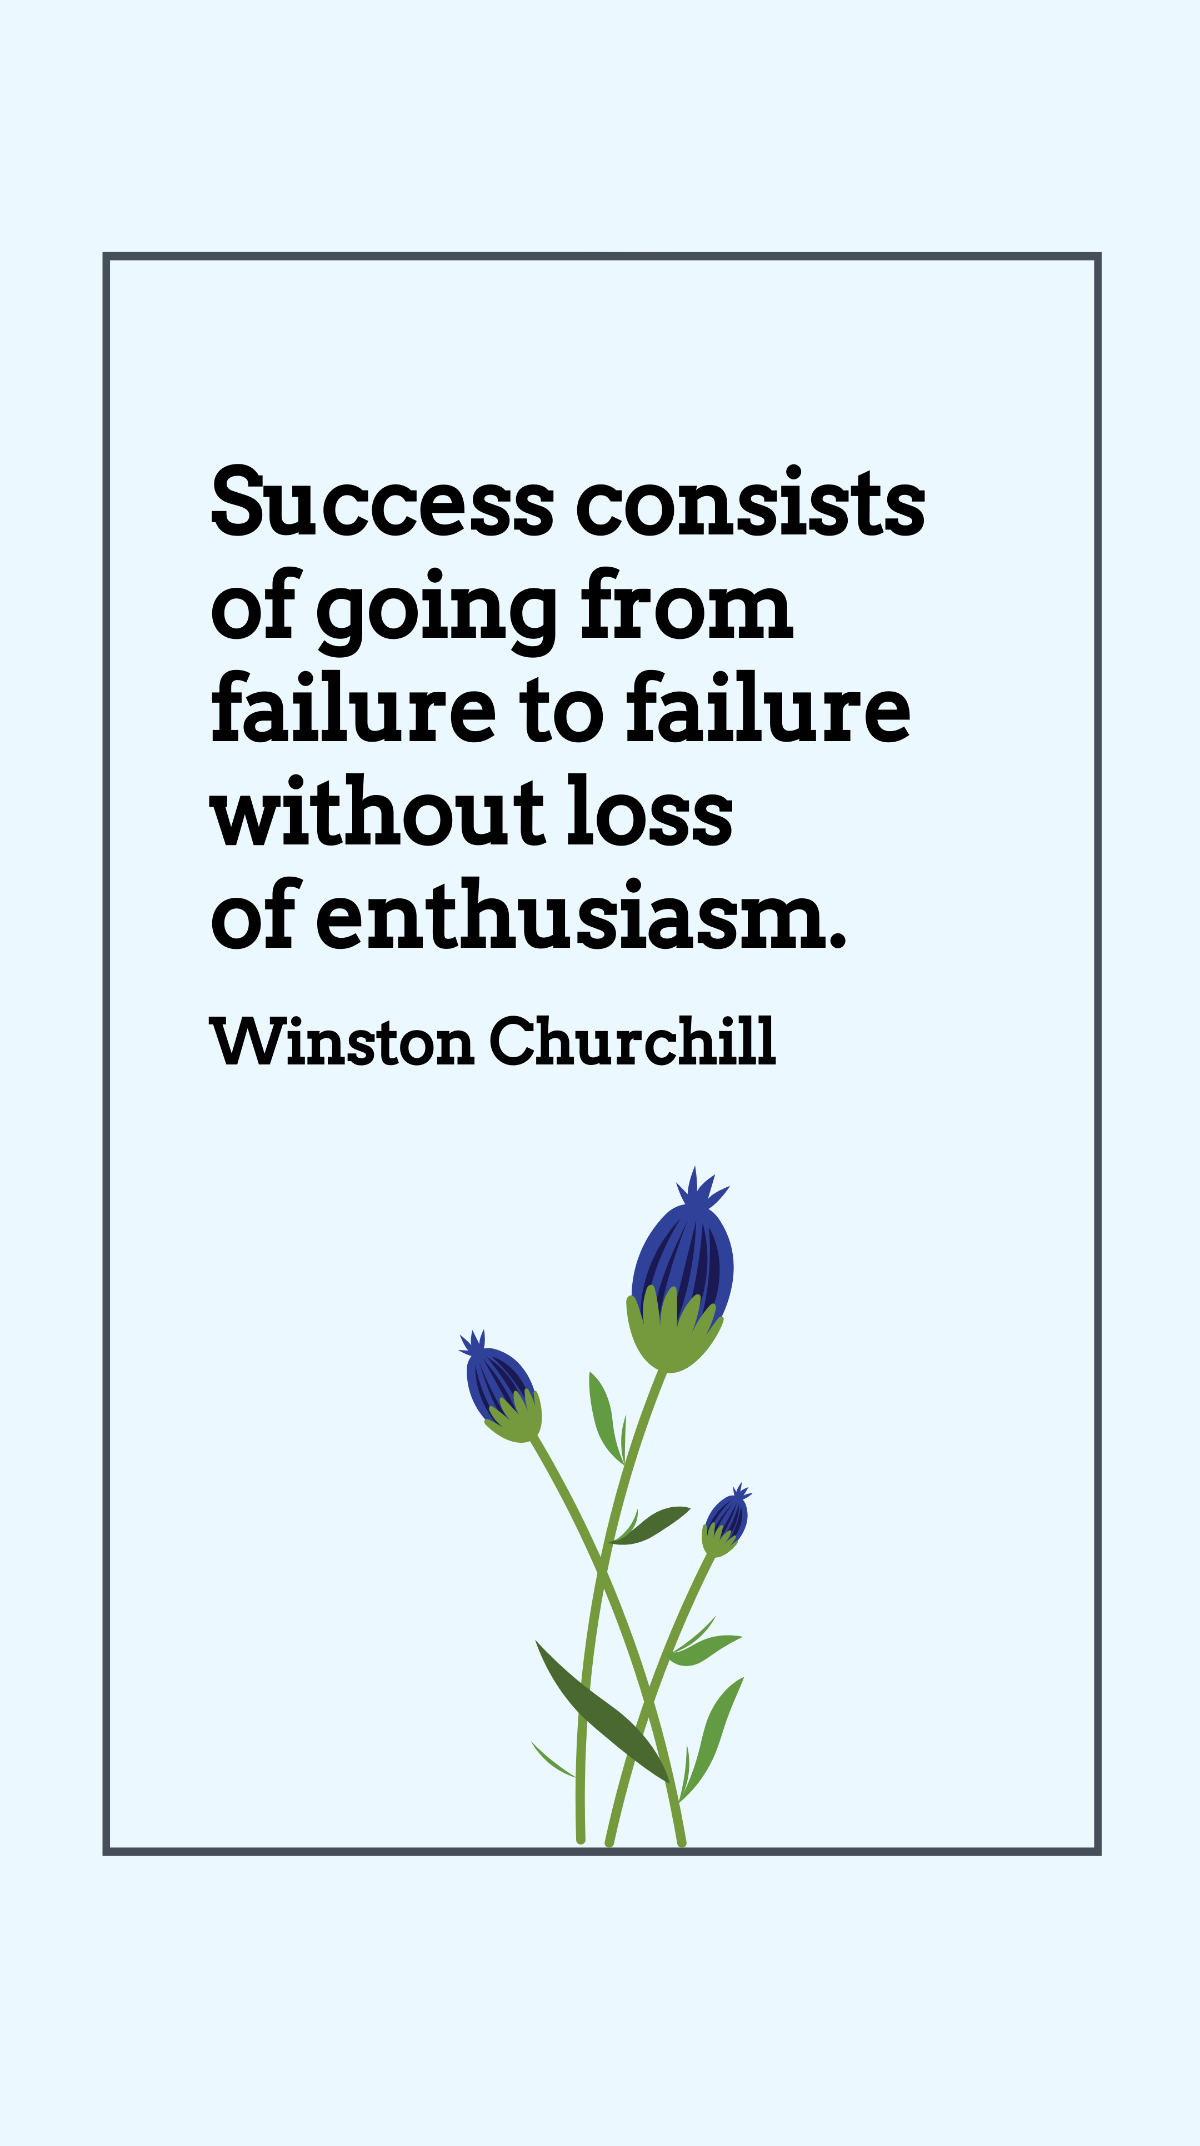 Winston Churchill - Success consists of going from failure to failure without loss of enthusiasm. Template